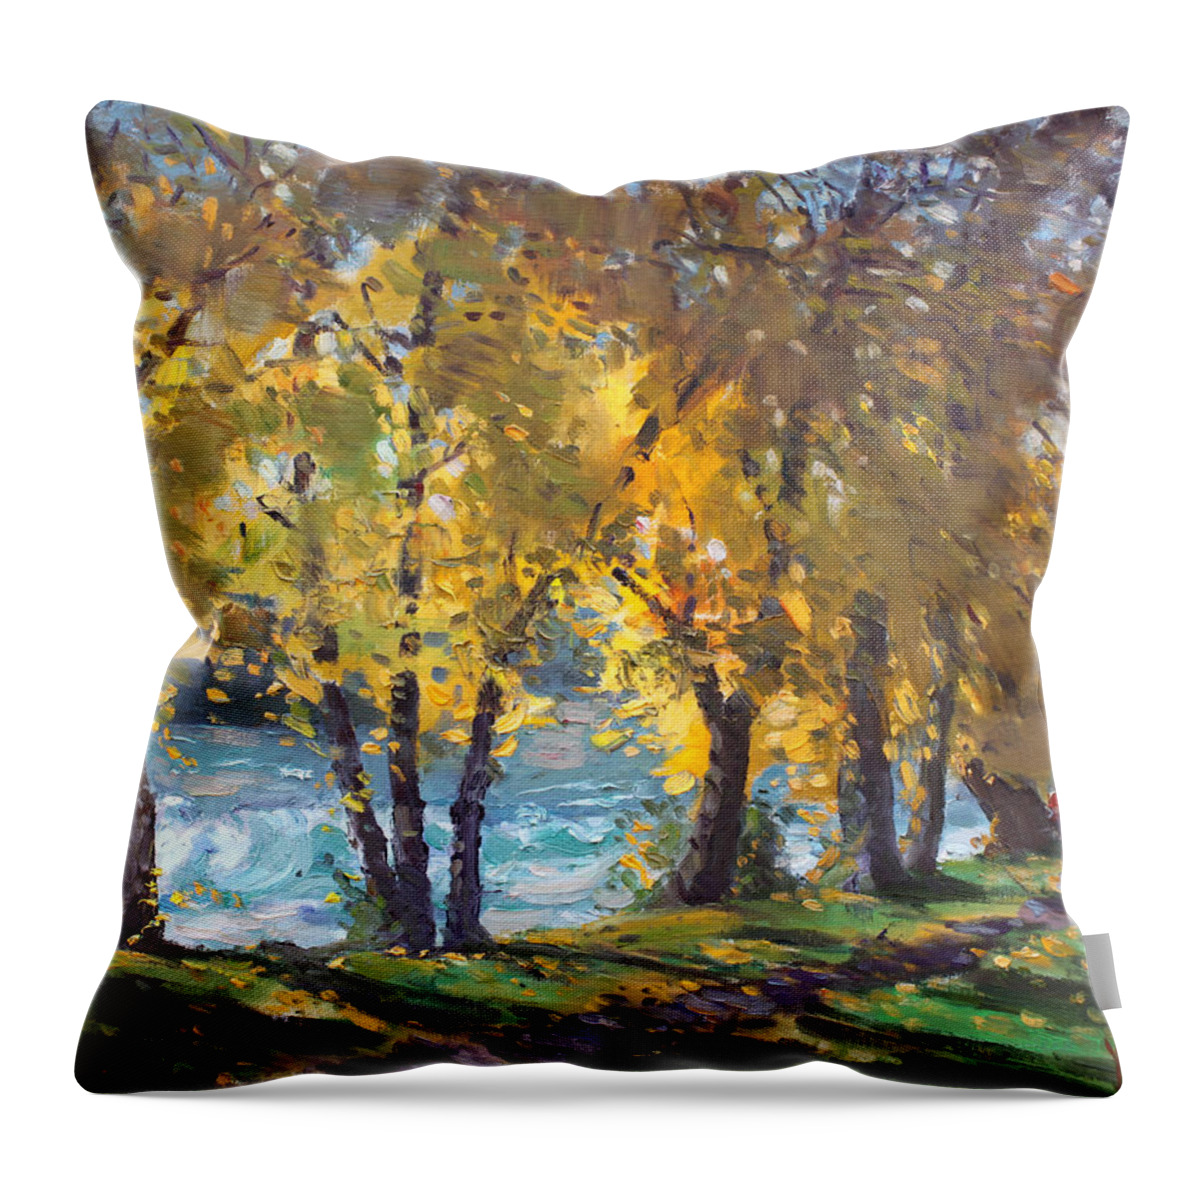 Autumn Throw Pillow featuring the painting Autumn Walk by Ylli Haruni